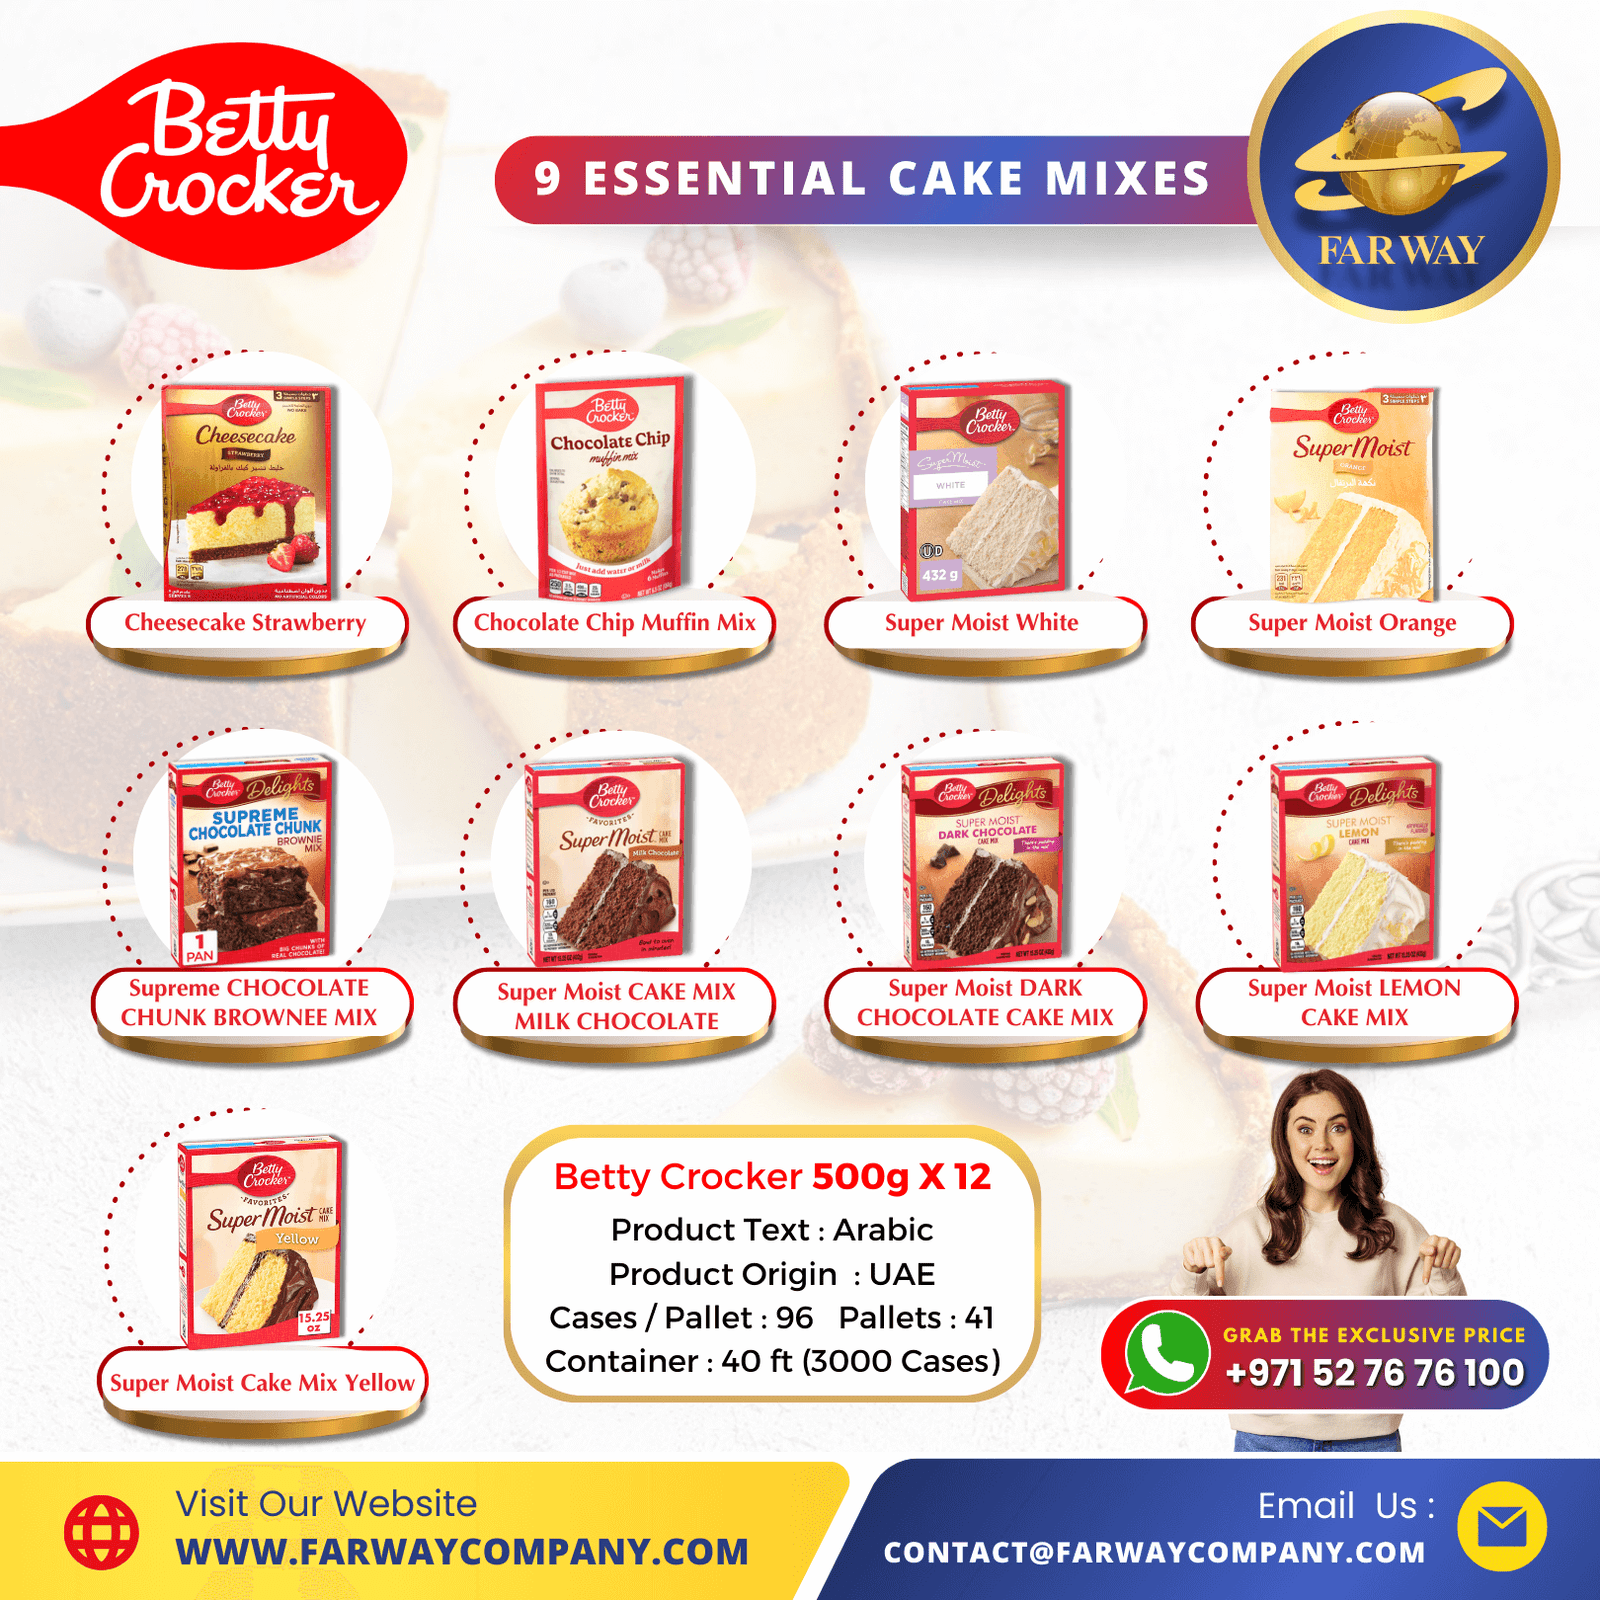 Betty Crocker Cake Mix 500g Importer, Exporter & Confectionary Distributor in Dubai, UAE, Middle East